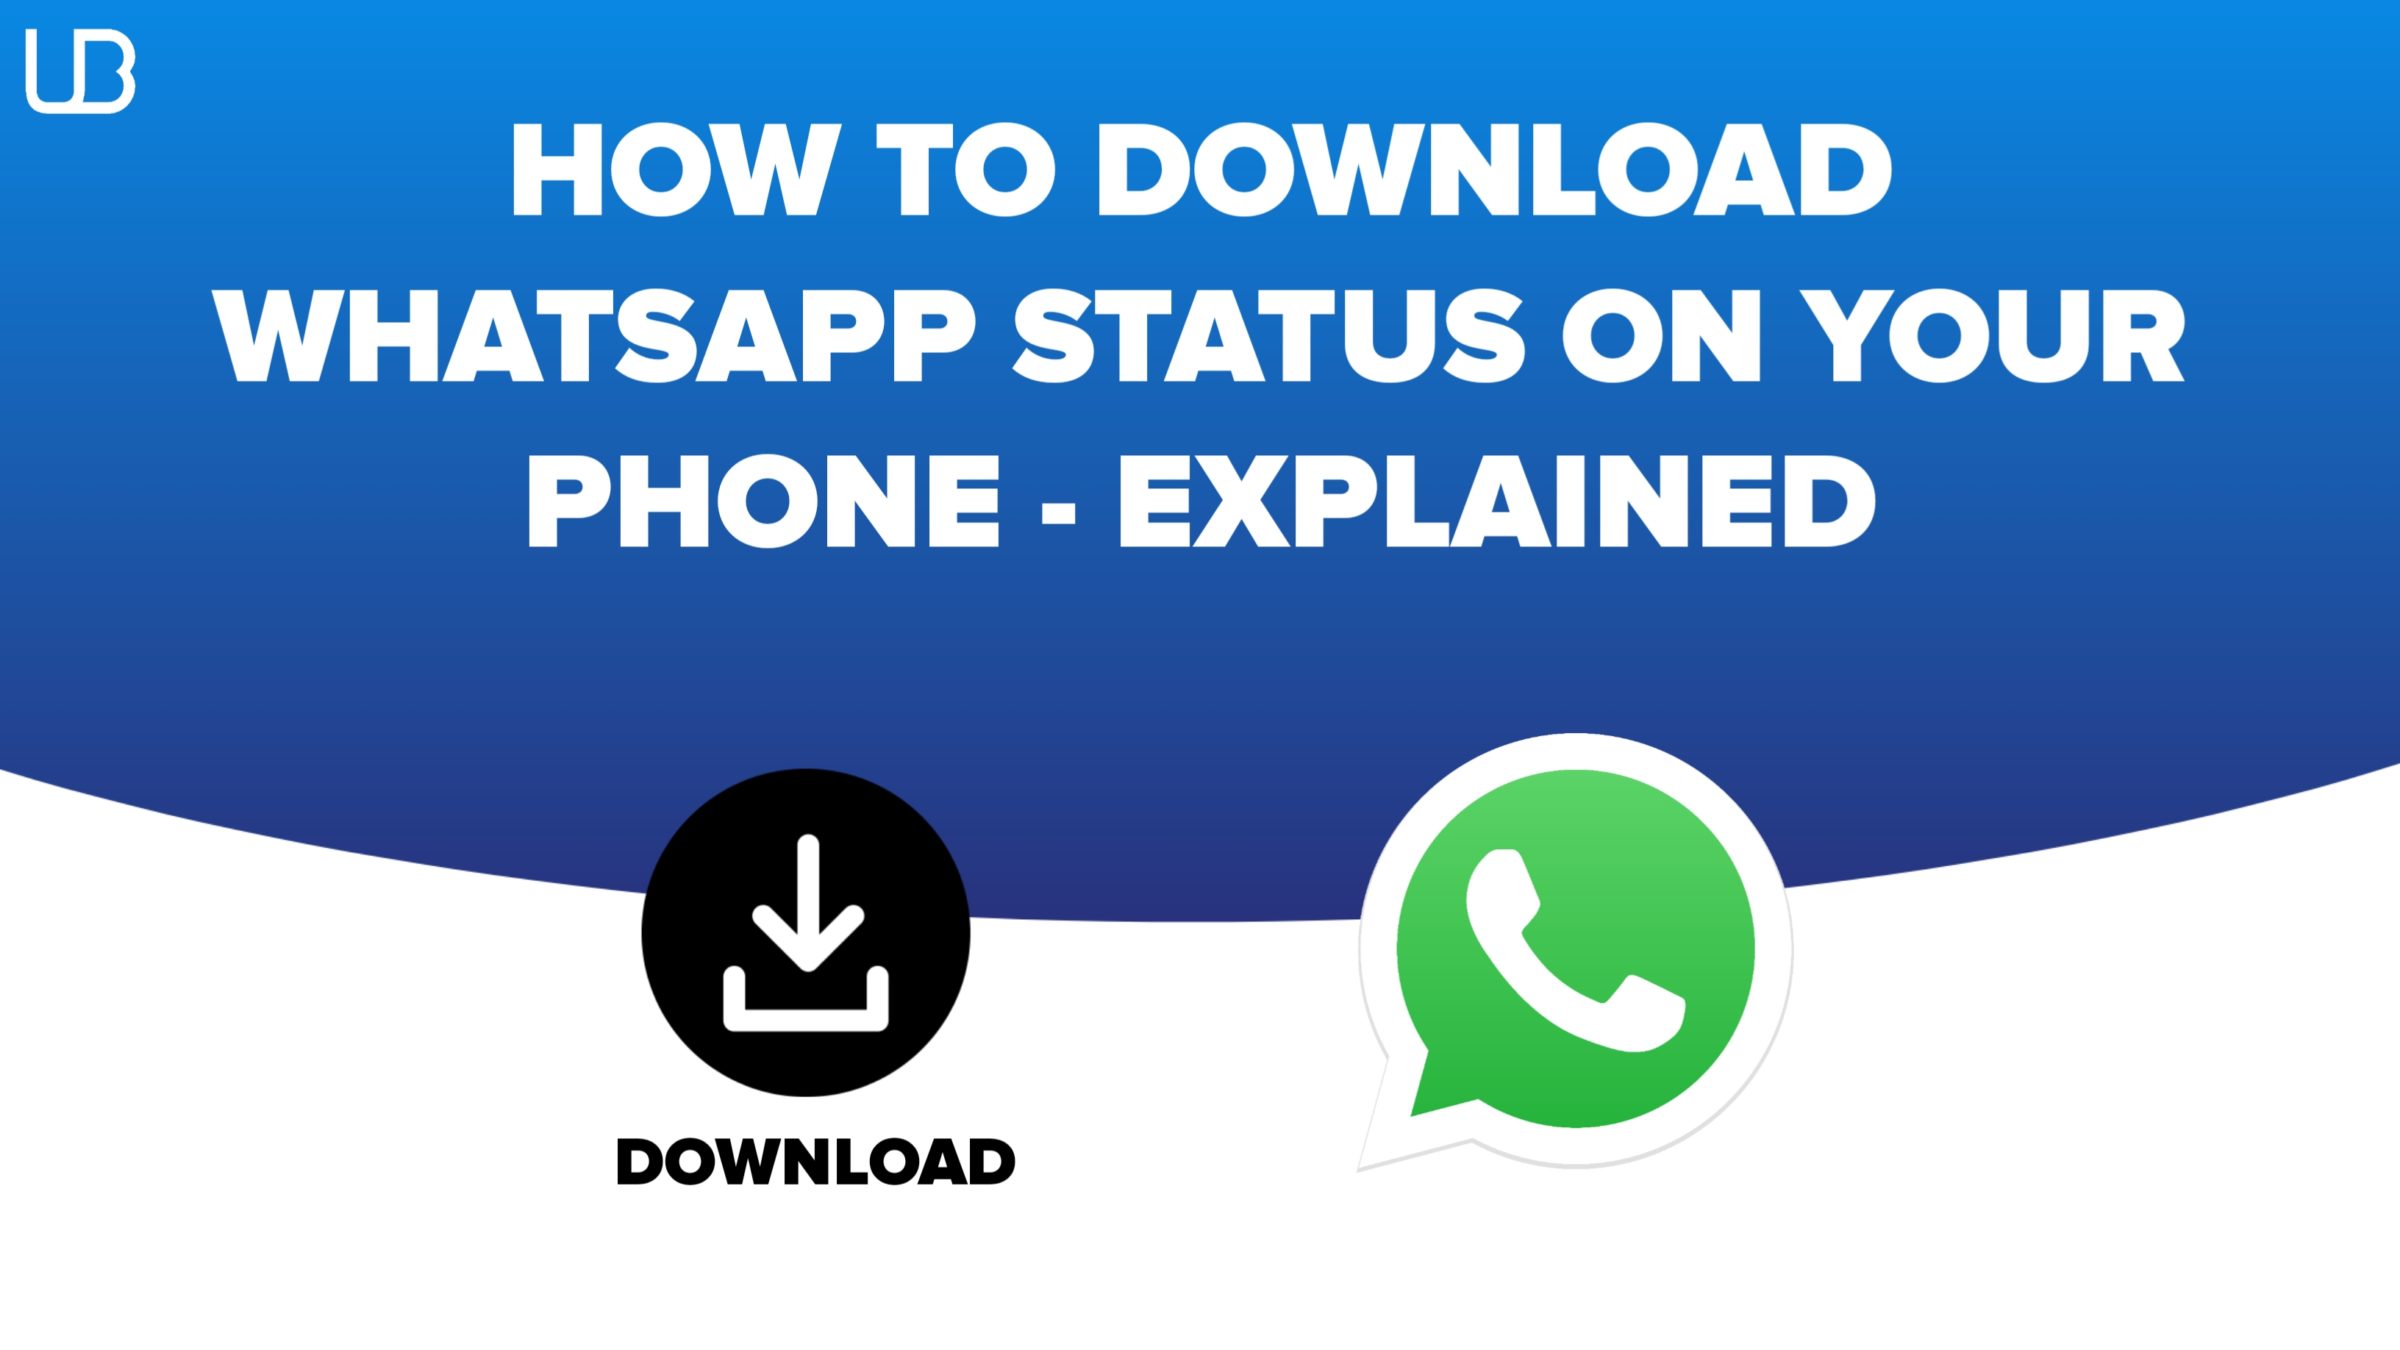 How to download WhatsApp Status on your phone - Explained